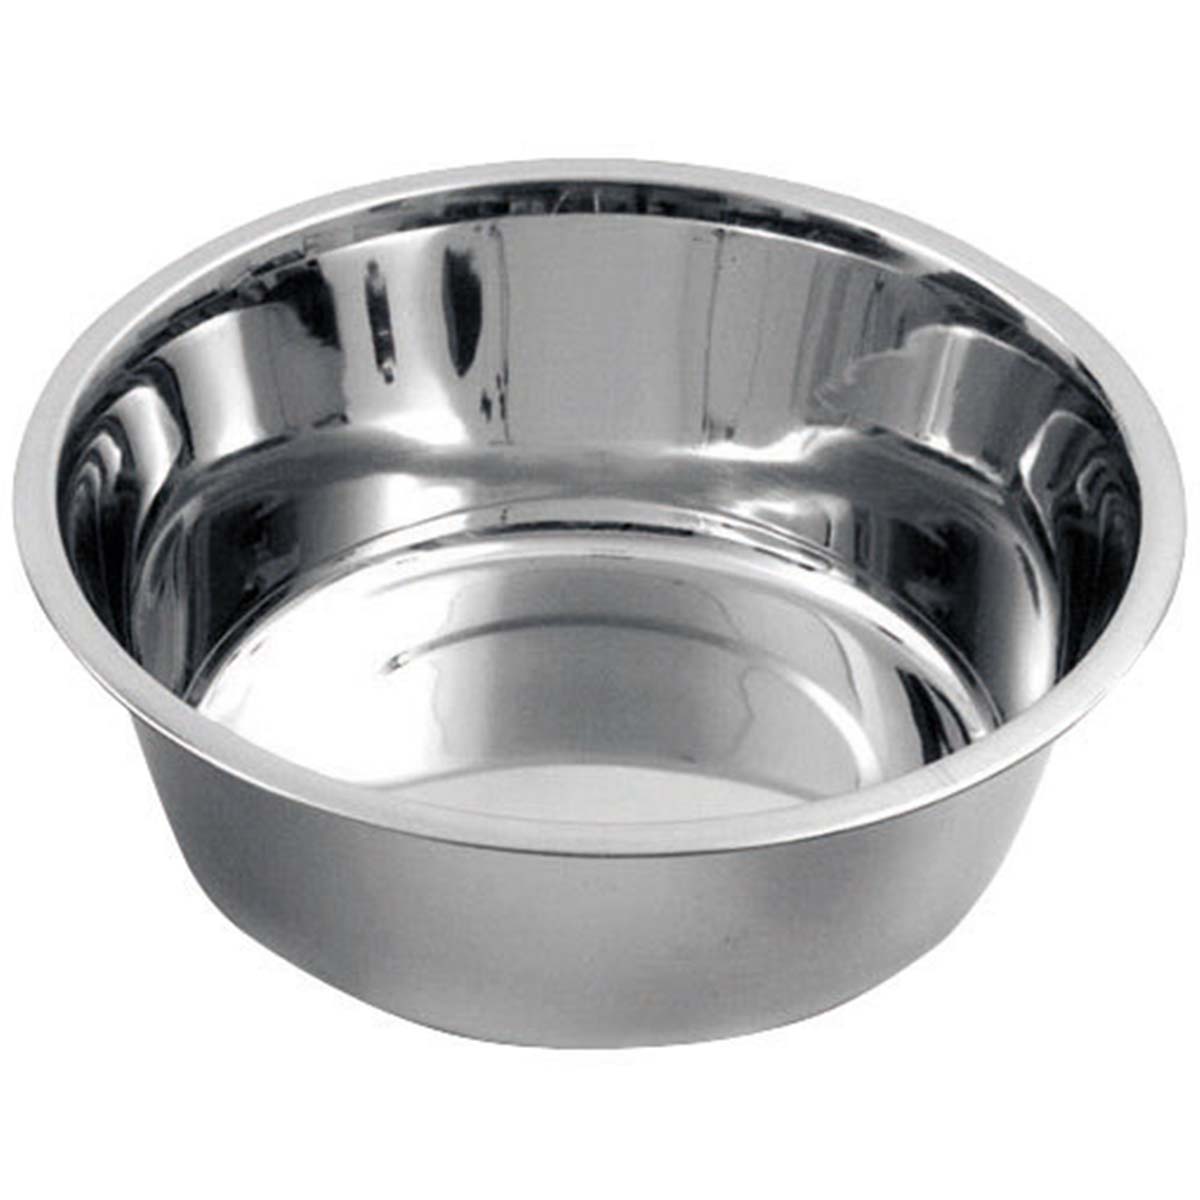 Bowl holder for walls and kennels incl. 1 bowl